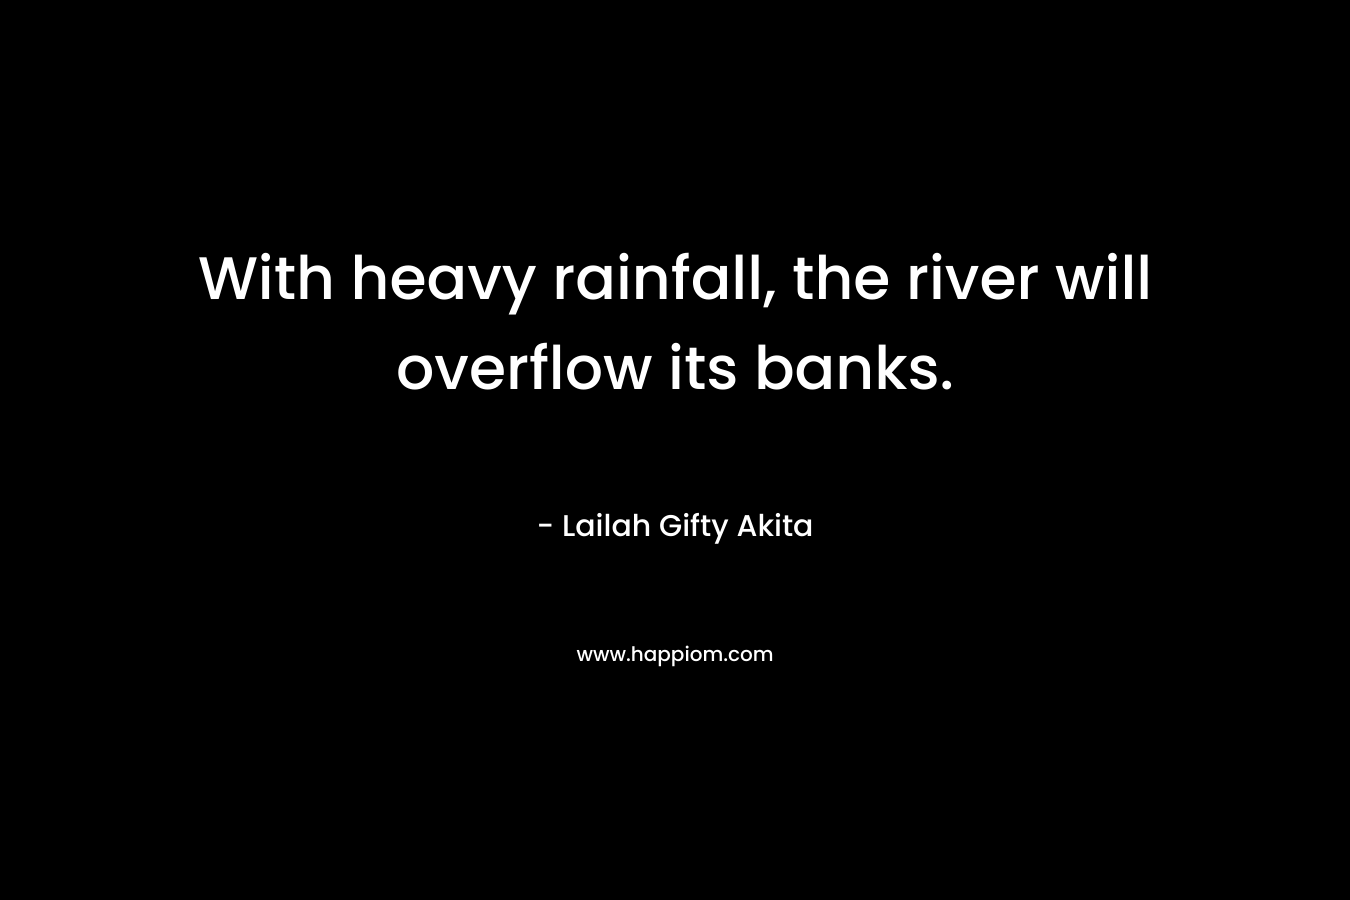 With heavy rainfall, the river will overflow its banks.